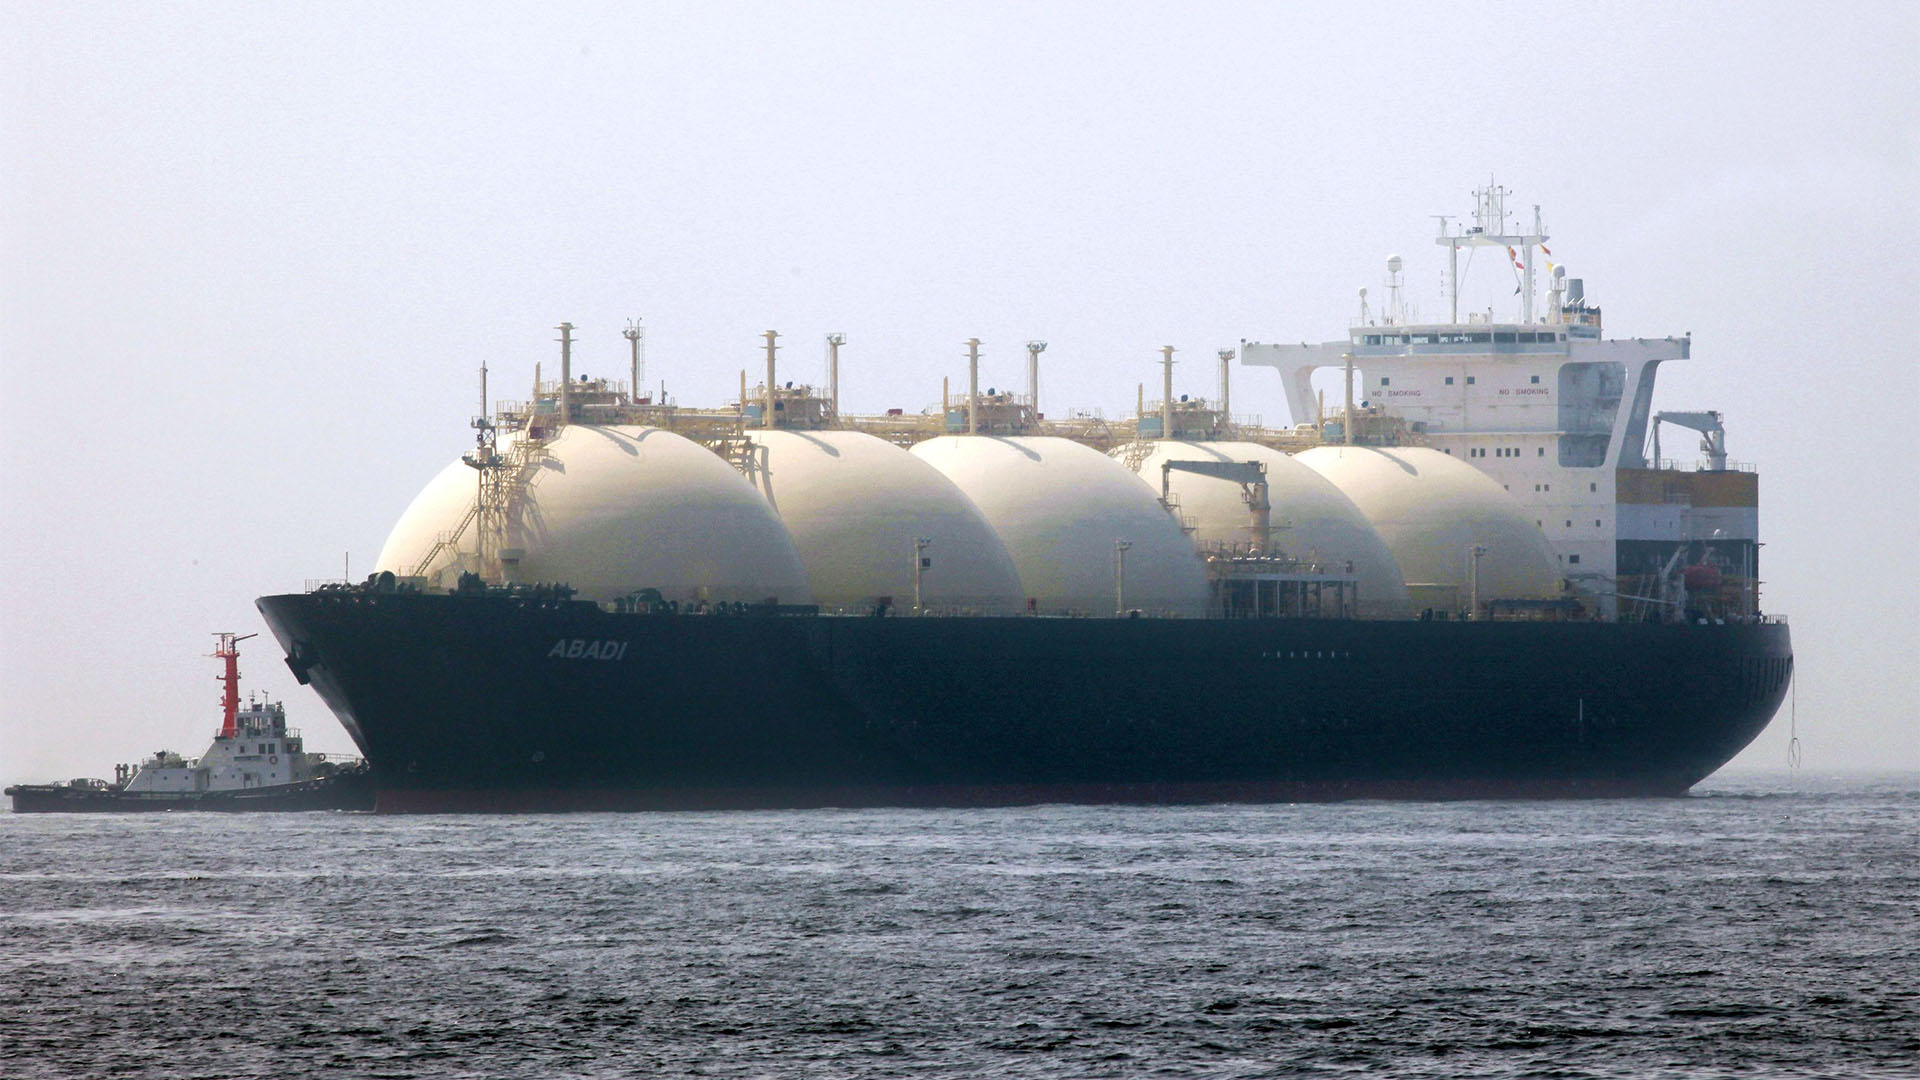 A liquefied-natural-gas (LNG) tanker, leaves a berth in Yokohama City, Kanagawa Prefecture, Japan, on Saturday, June 20, 2009. The world LNG market is likely to face supply shortages around 2013 as new projects fail to keep pace with supply, according to Wood Mackenzie, a U.K. energy research and consulting company. Photographer: Kimimasa Mayama/Bloomberg News